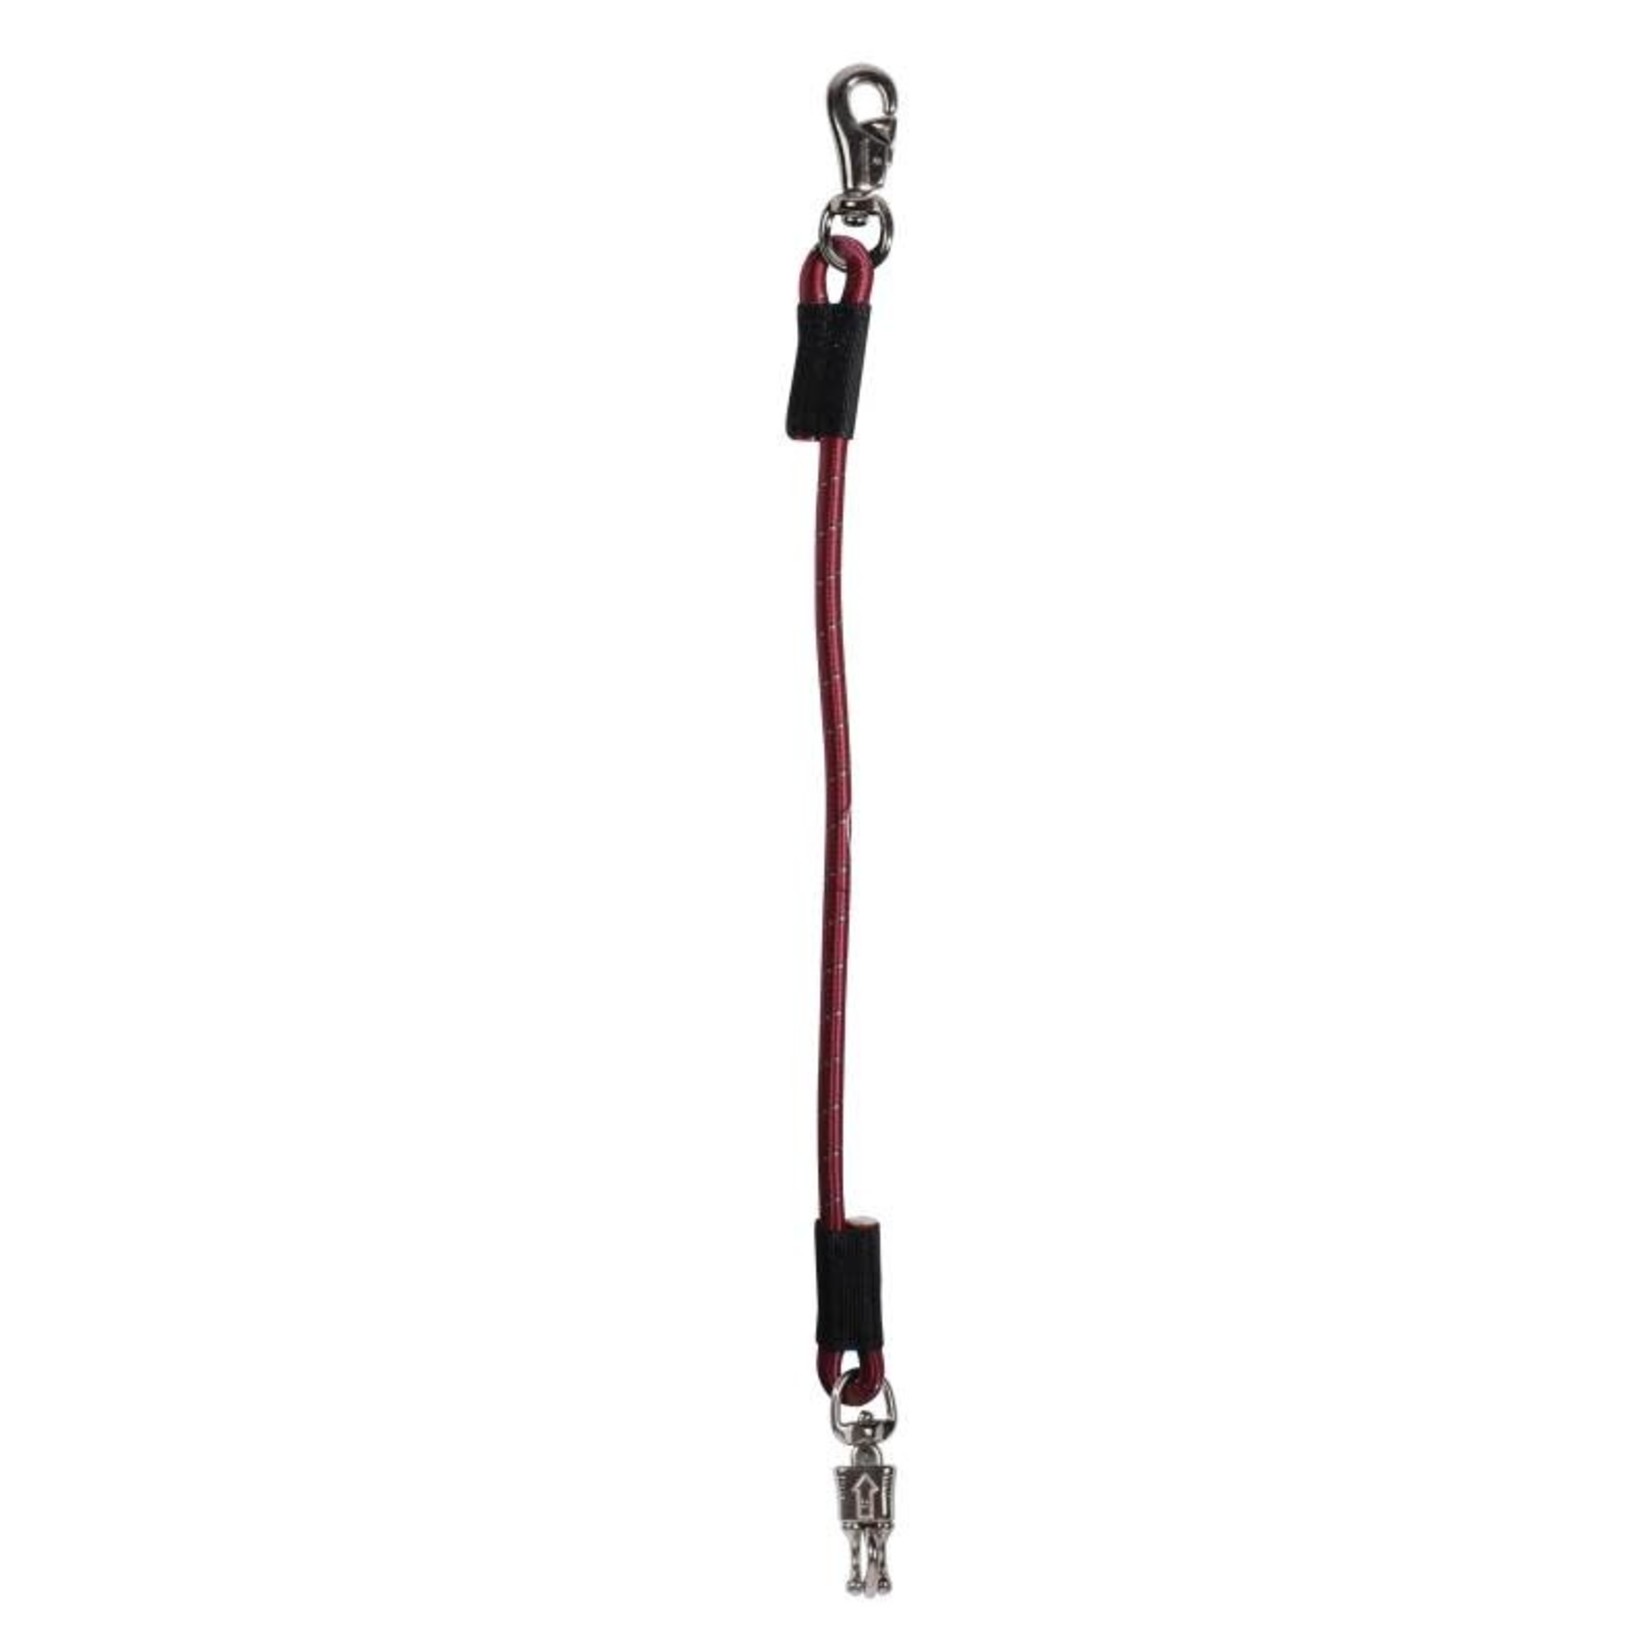 Professional's Choice PC Bungee Trailer Tie - Wine